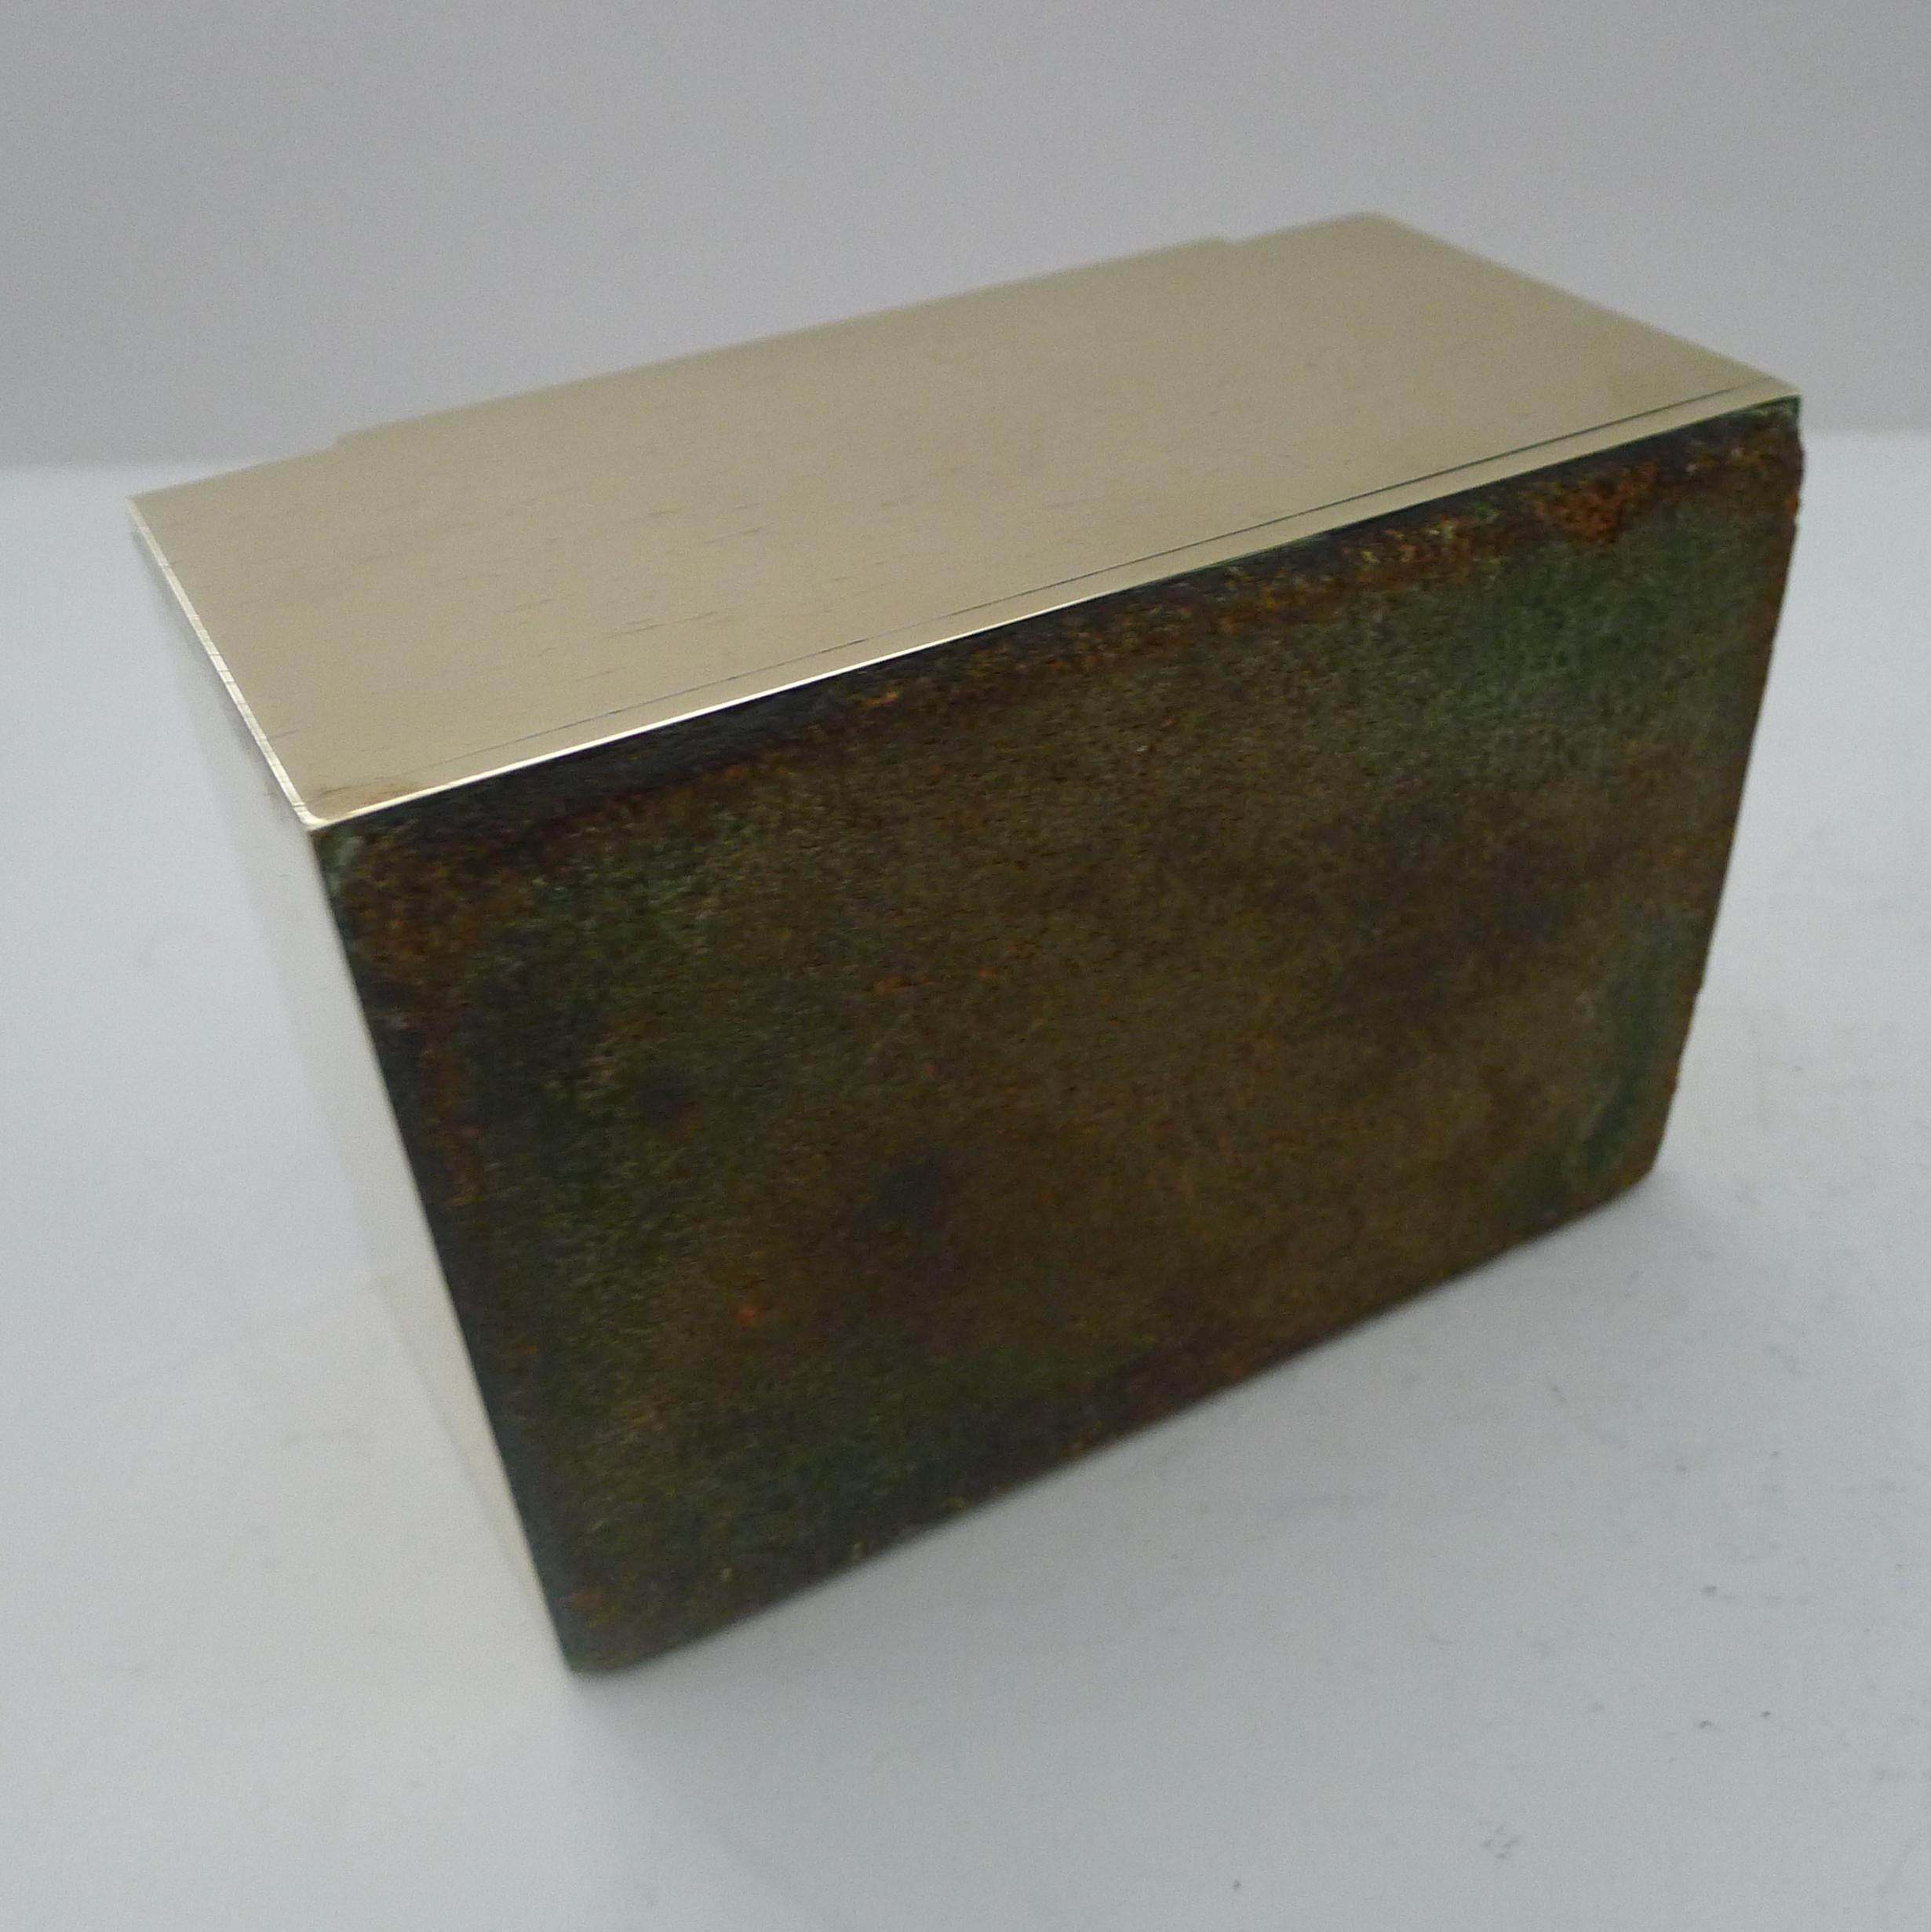 A wonderful and heavy jewelry box or casket. The rectangular box has a lift off lift with the aide of the folding handle to the centre of the lid. The brass has a slight naturalistic textured finish.

The interior to the box and lid is lined in a